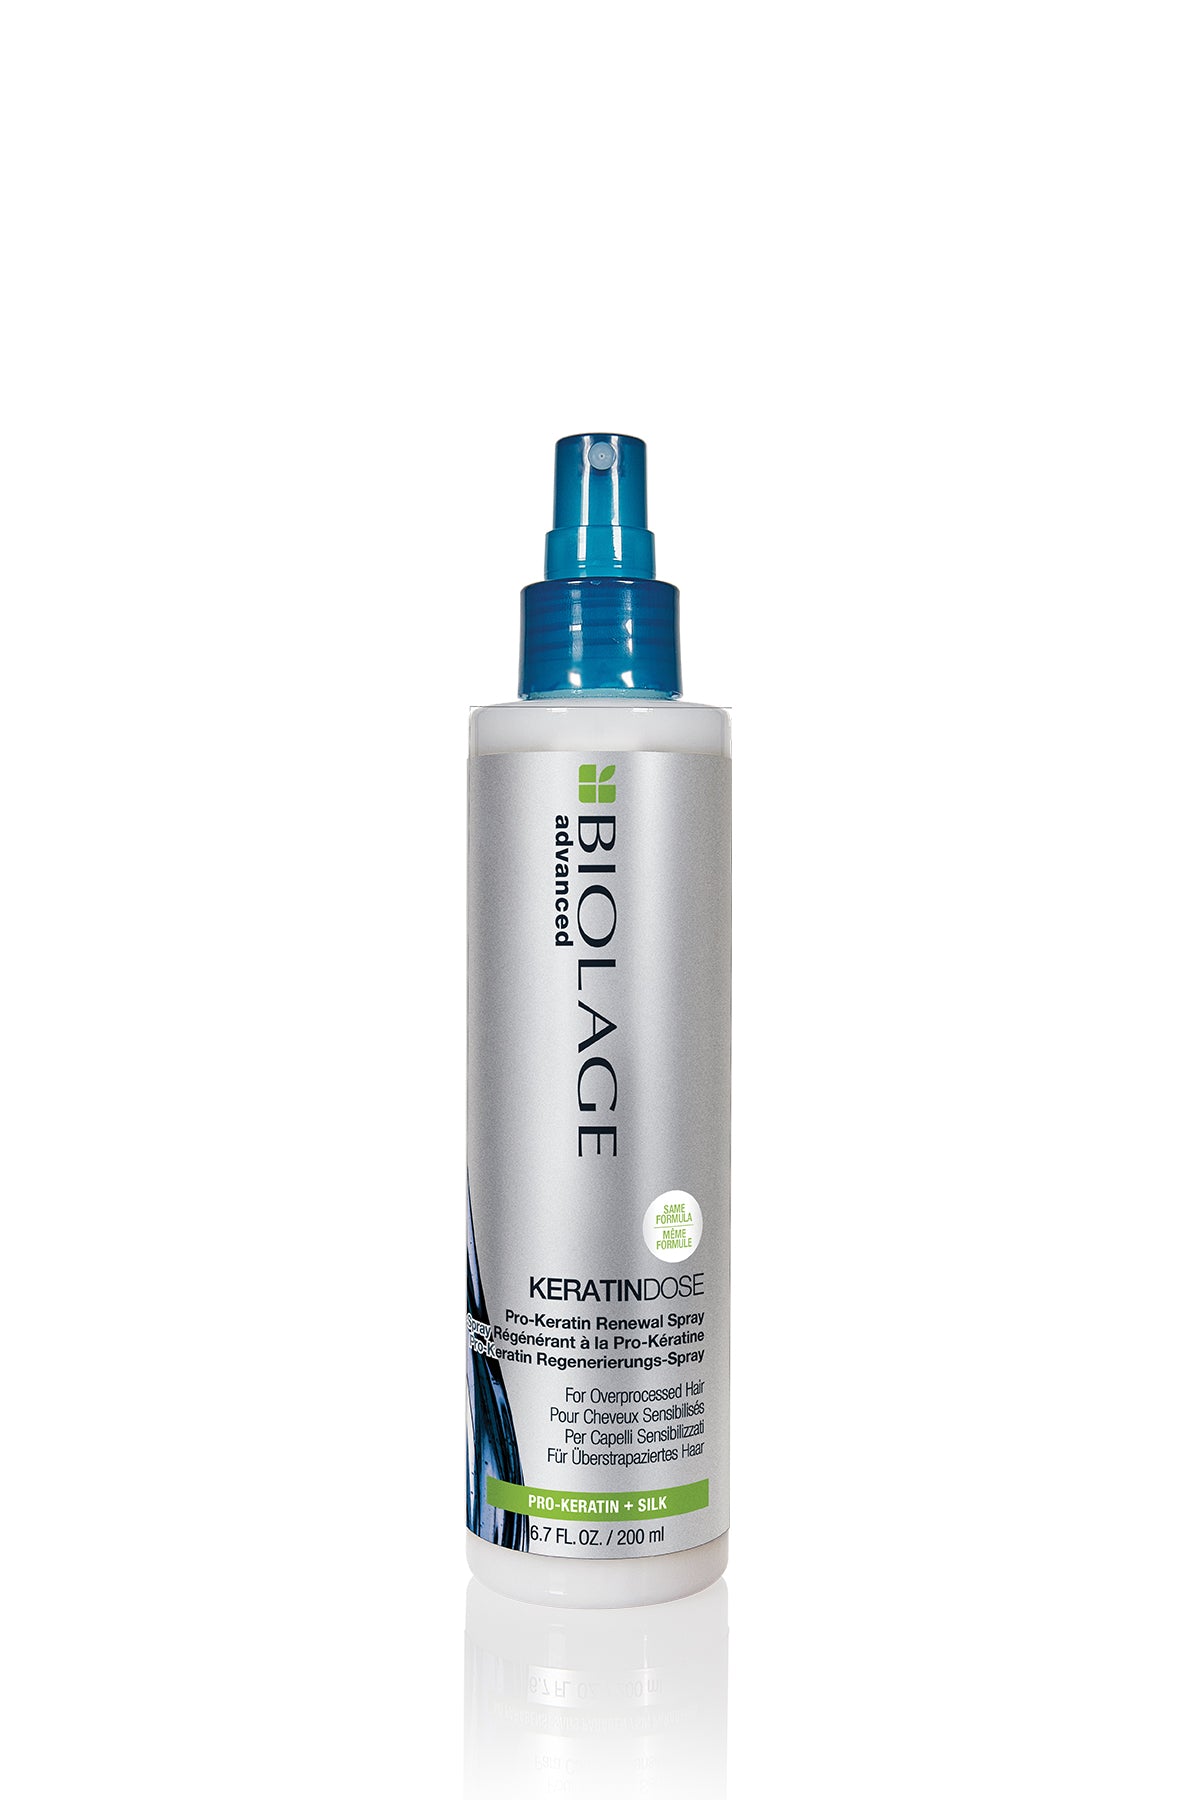 Shop The Latest Collection Of Biolage Keratindose Renew Spray 200 Ml For Over-Processed Hair In Lebanon